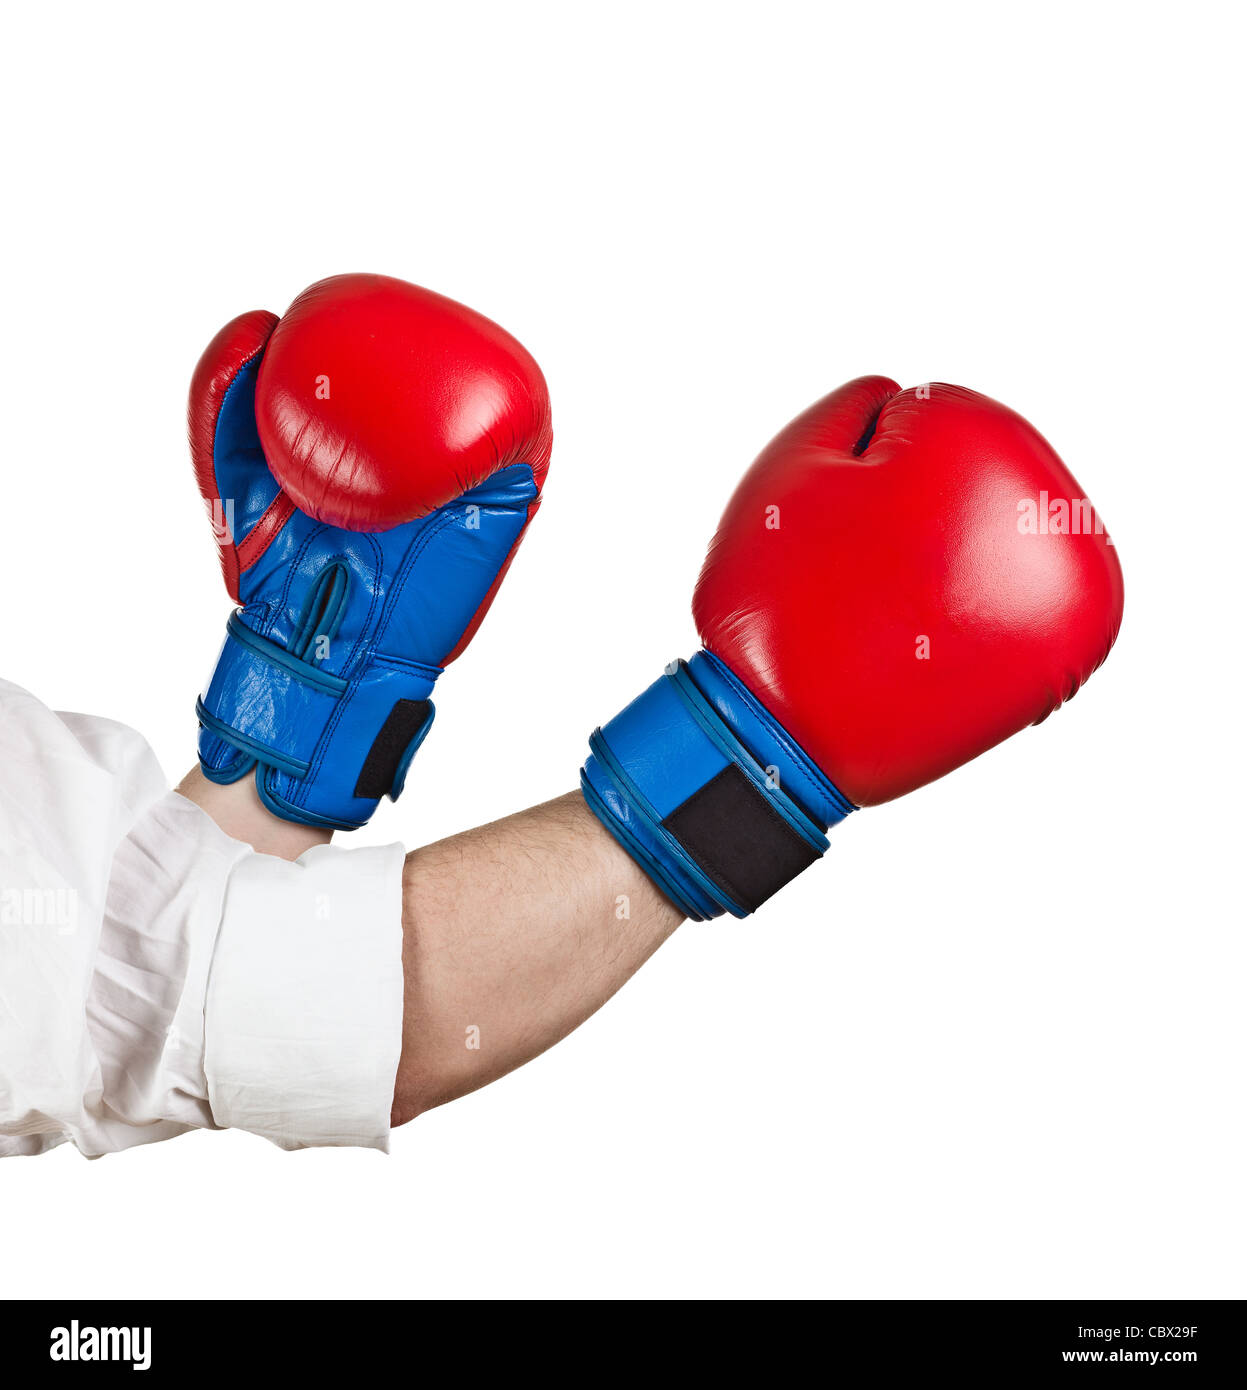 Man wearing white shirt and boxing gloves Stock Photo